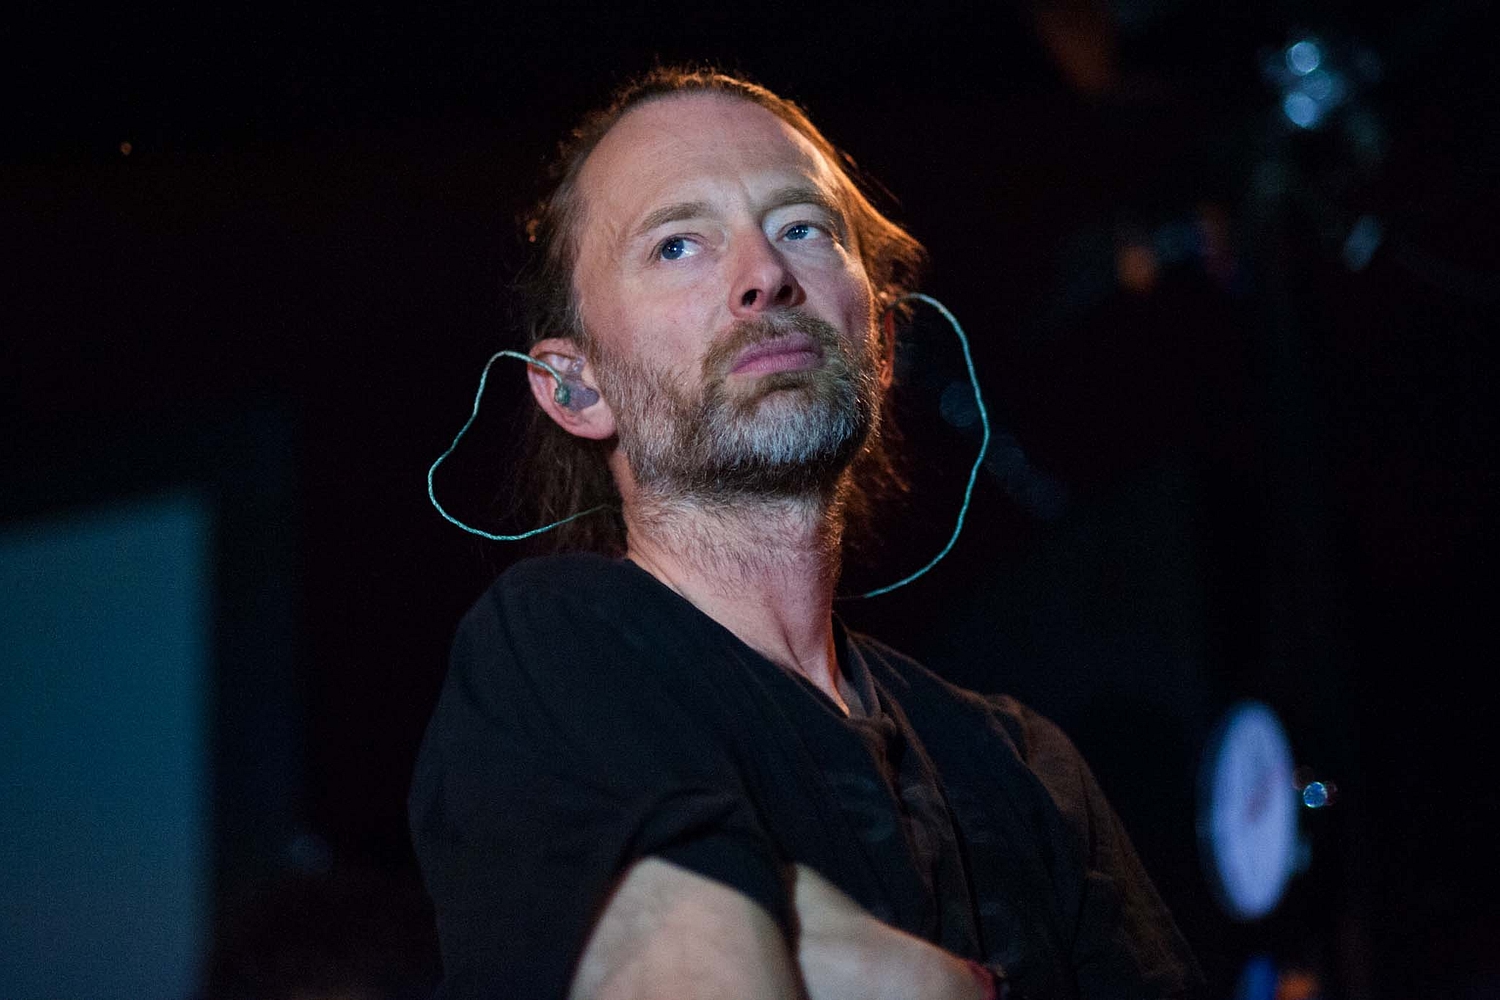 Watch footage from Thom Yorke’s surprise Latitude set